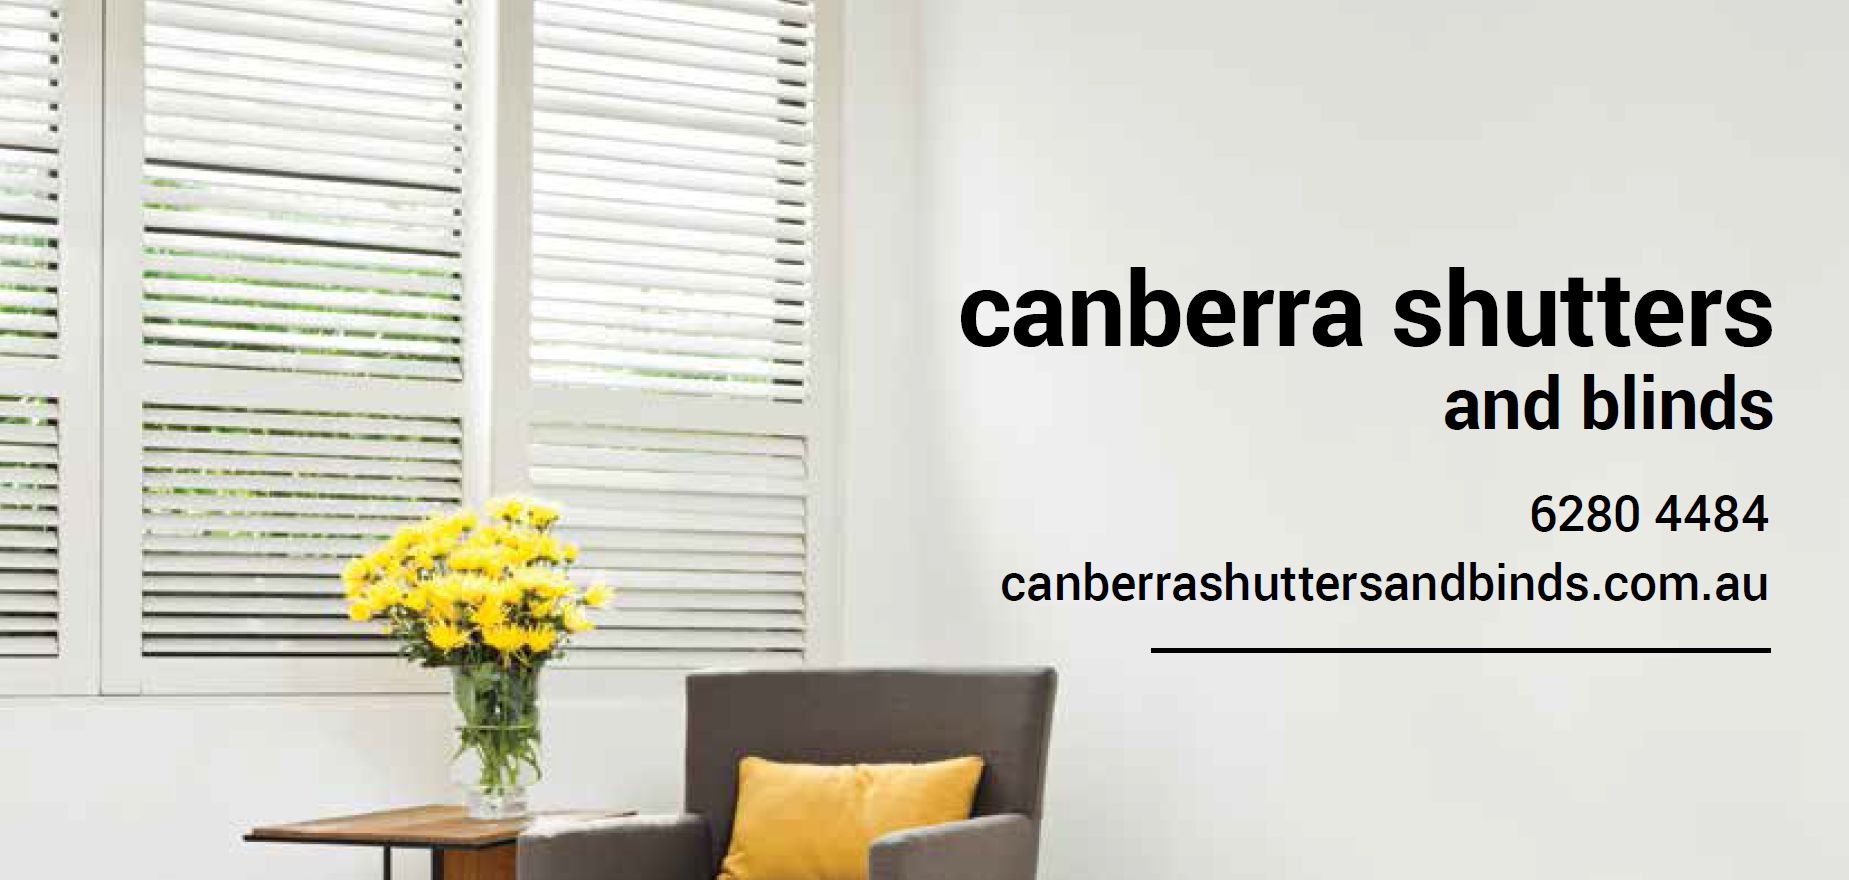 Canberra Shutters and Blinds